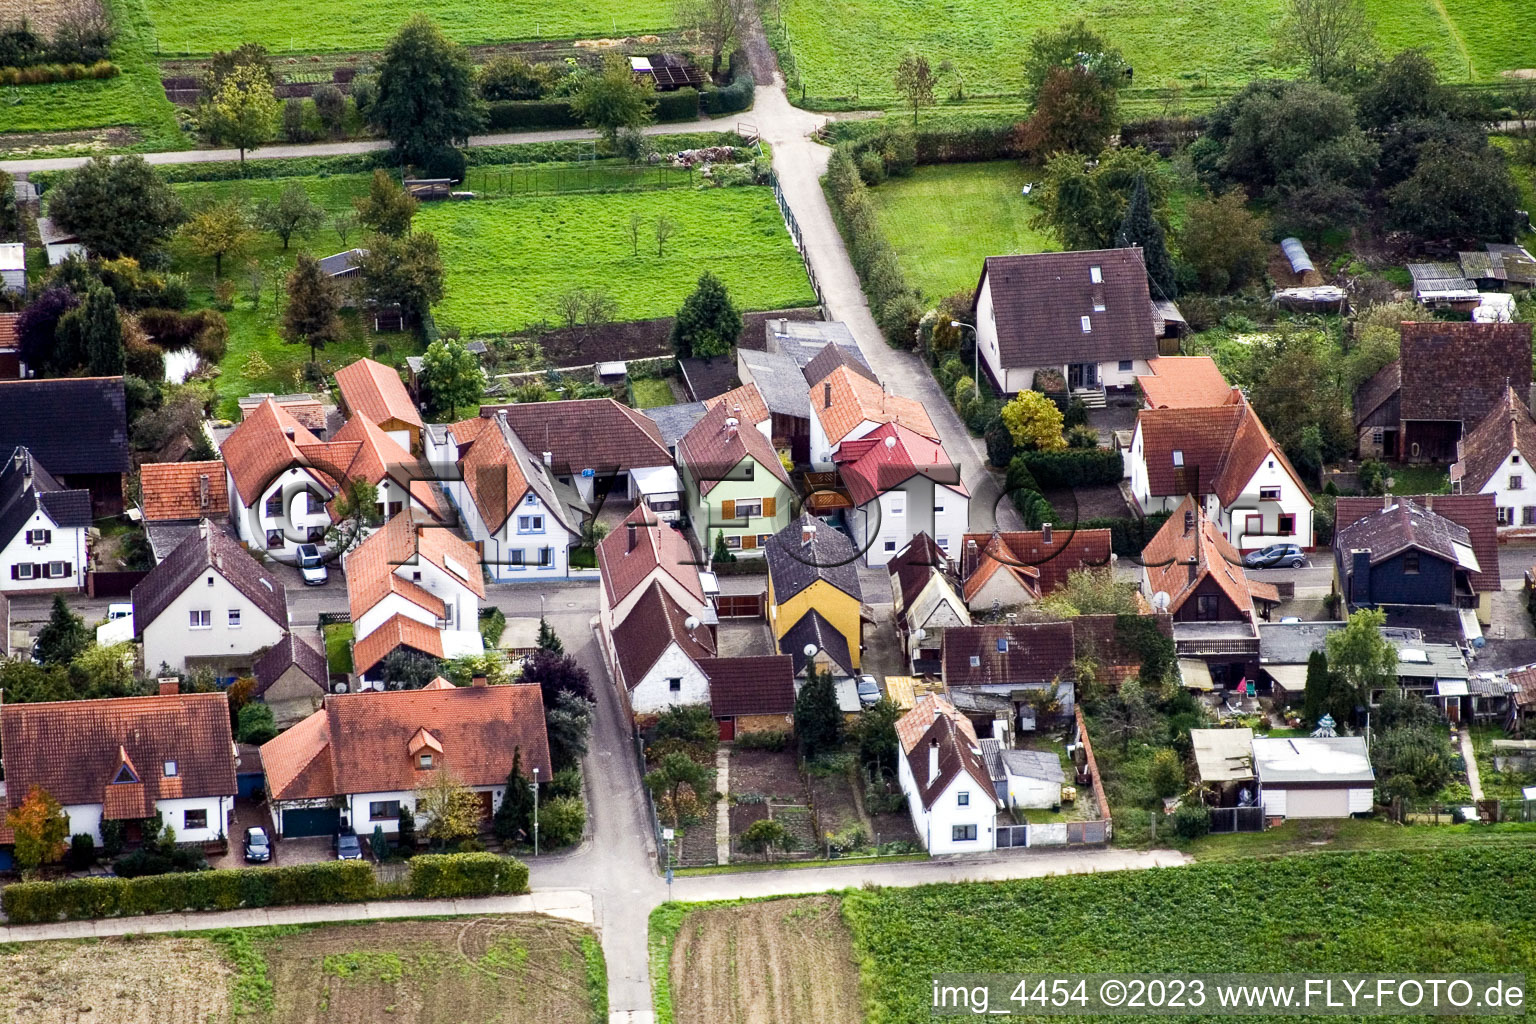 Bird's eye view of Gänsried in Freckenfeld in the state Rhineland-Palatinate, Germany